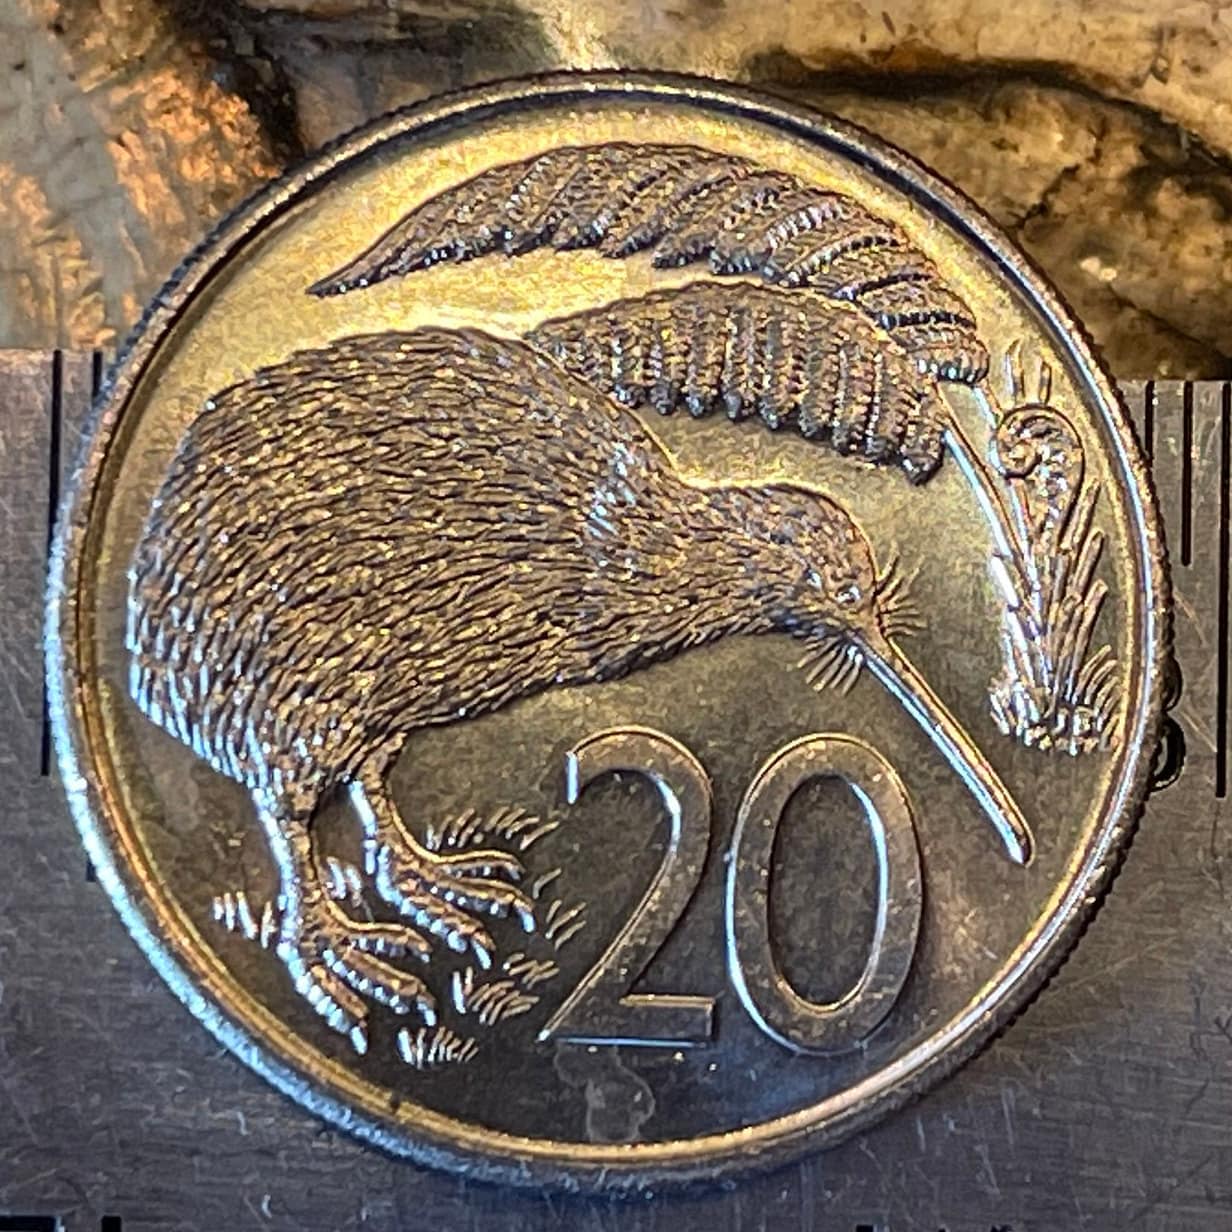 Kiwi 20 Cents New Zealand Authentic Coin Charm for Jewelry and Craft Making